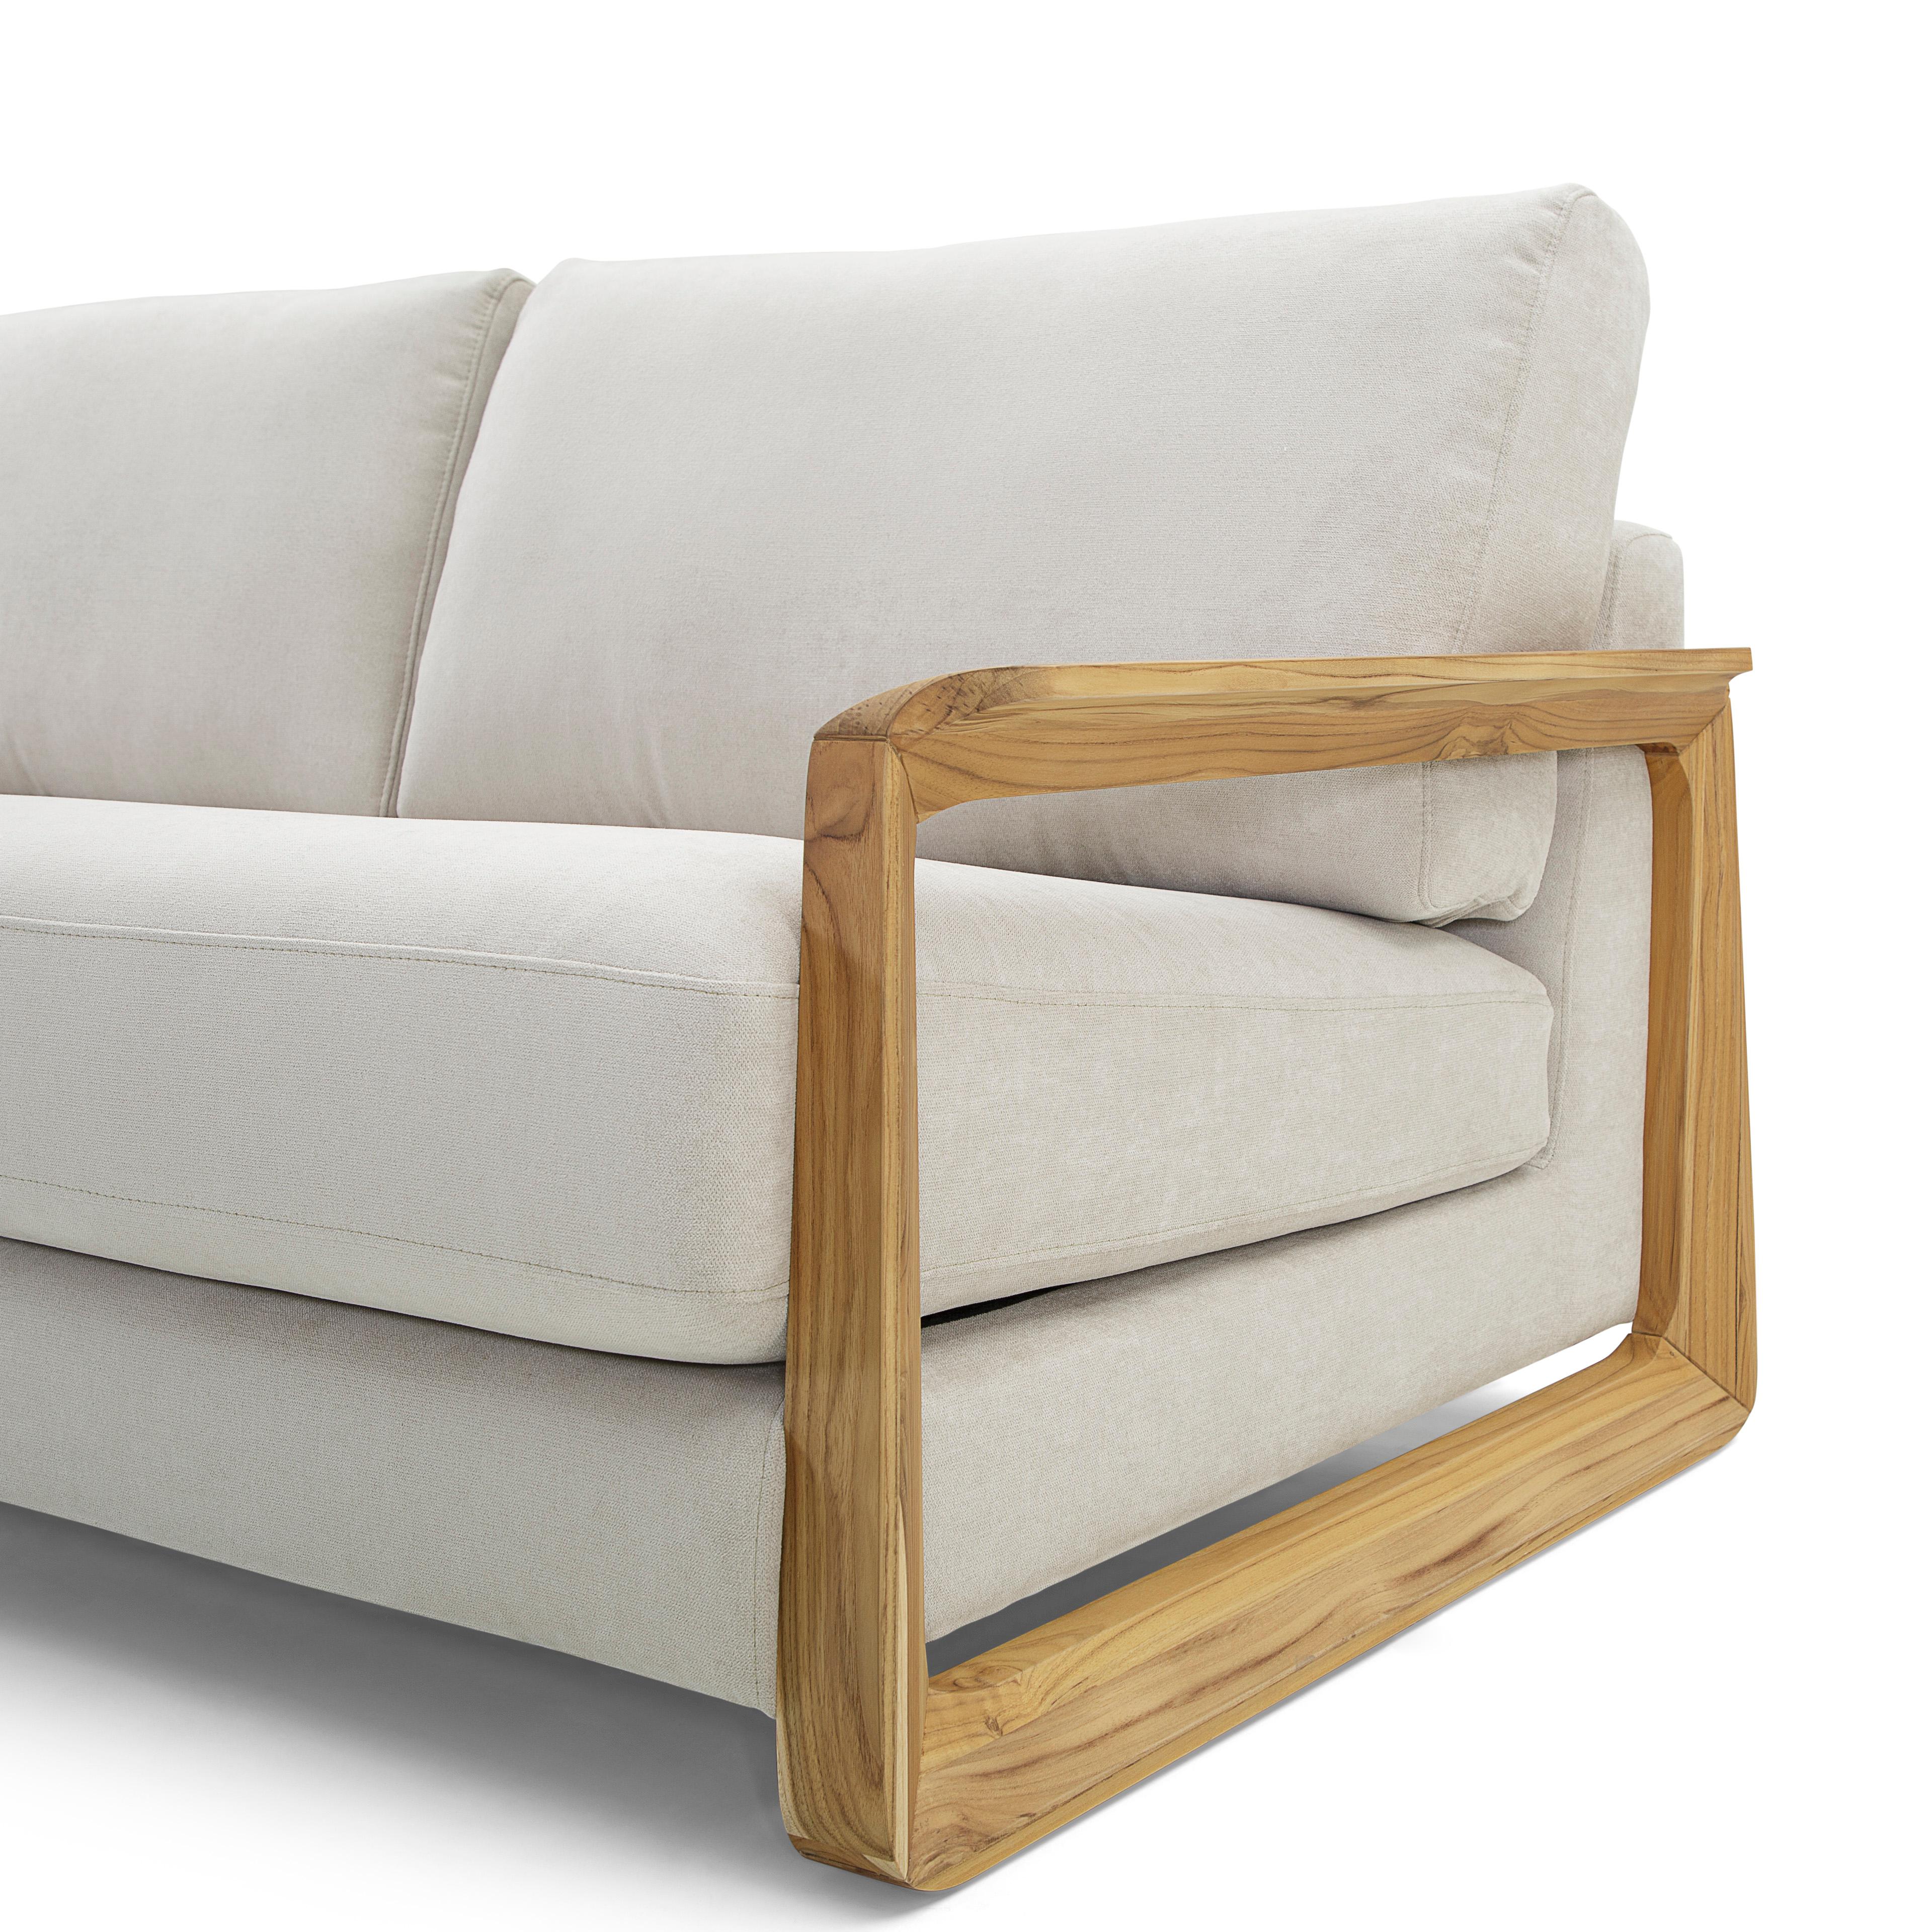 The Fine contemporary sofa upholstered in a stunning oatmeal fabric and its arms in a teak wood finish, is the perfect combination for your living room. As relaxing as it looks, the actual seat is even better. This sofa is the perfect complement to